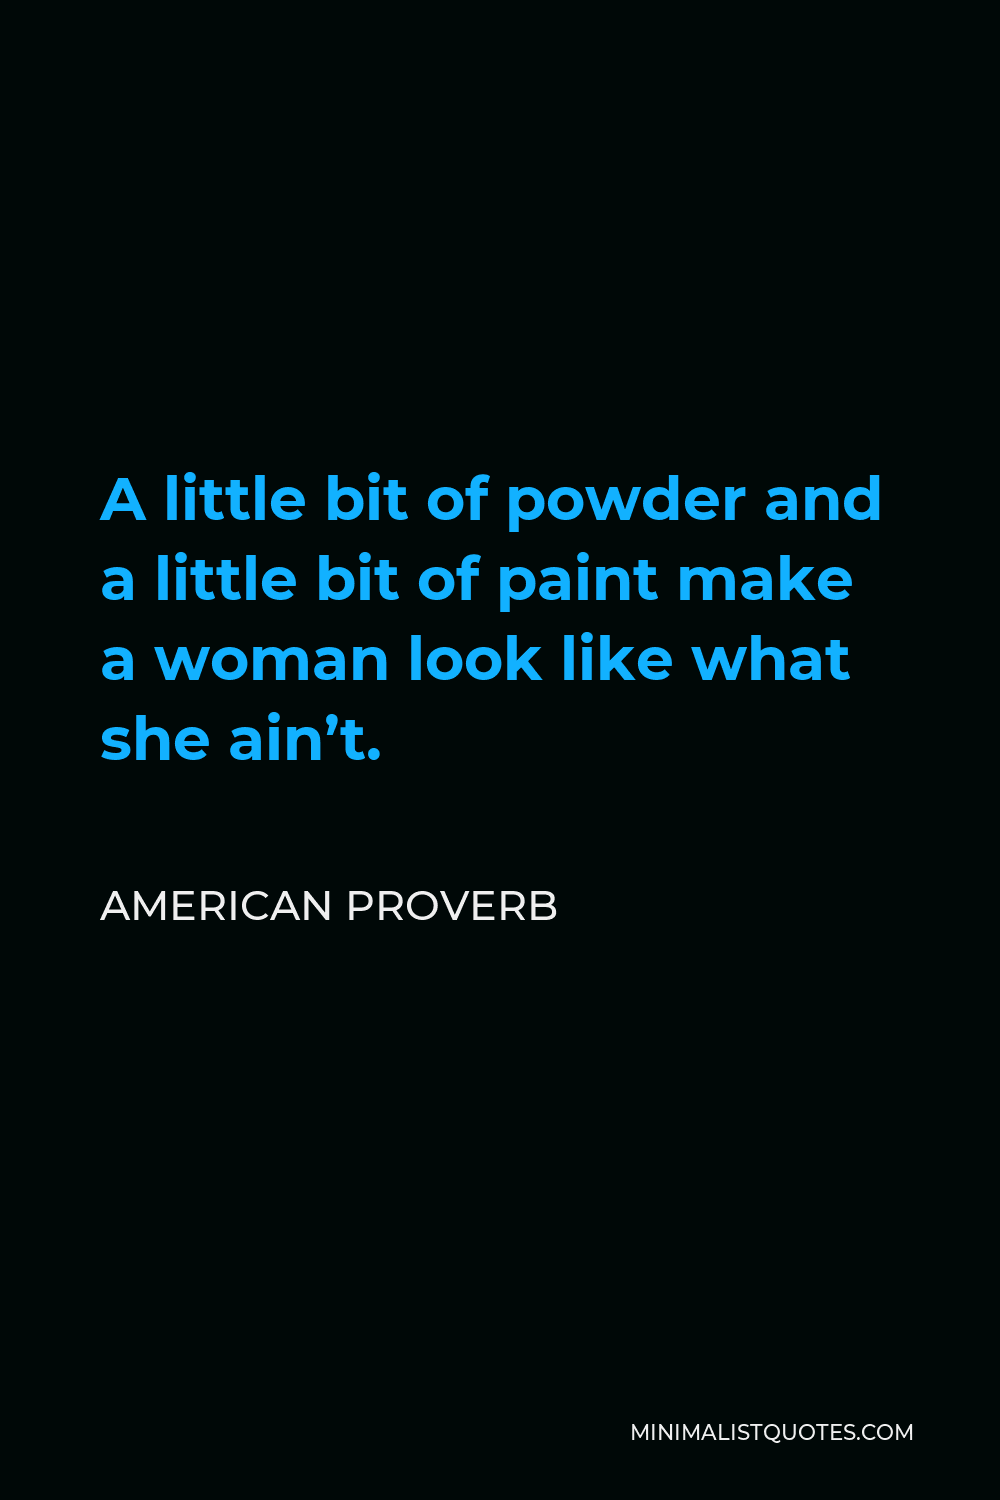 American Proverb Quote - A little bit of powder and a little bit of paint make a woman look like what she ain’t.